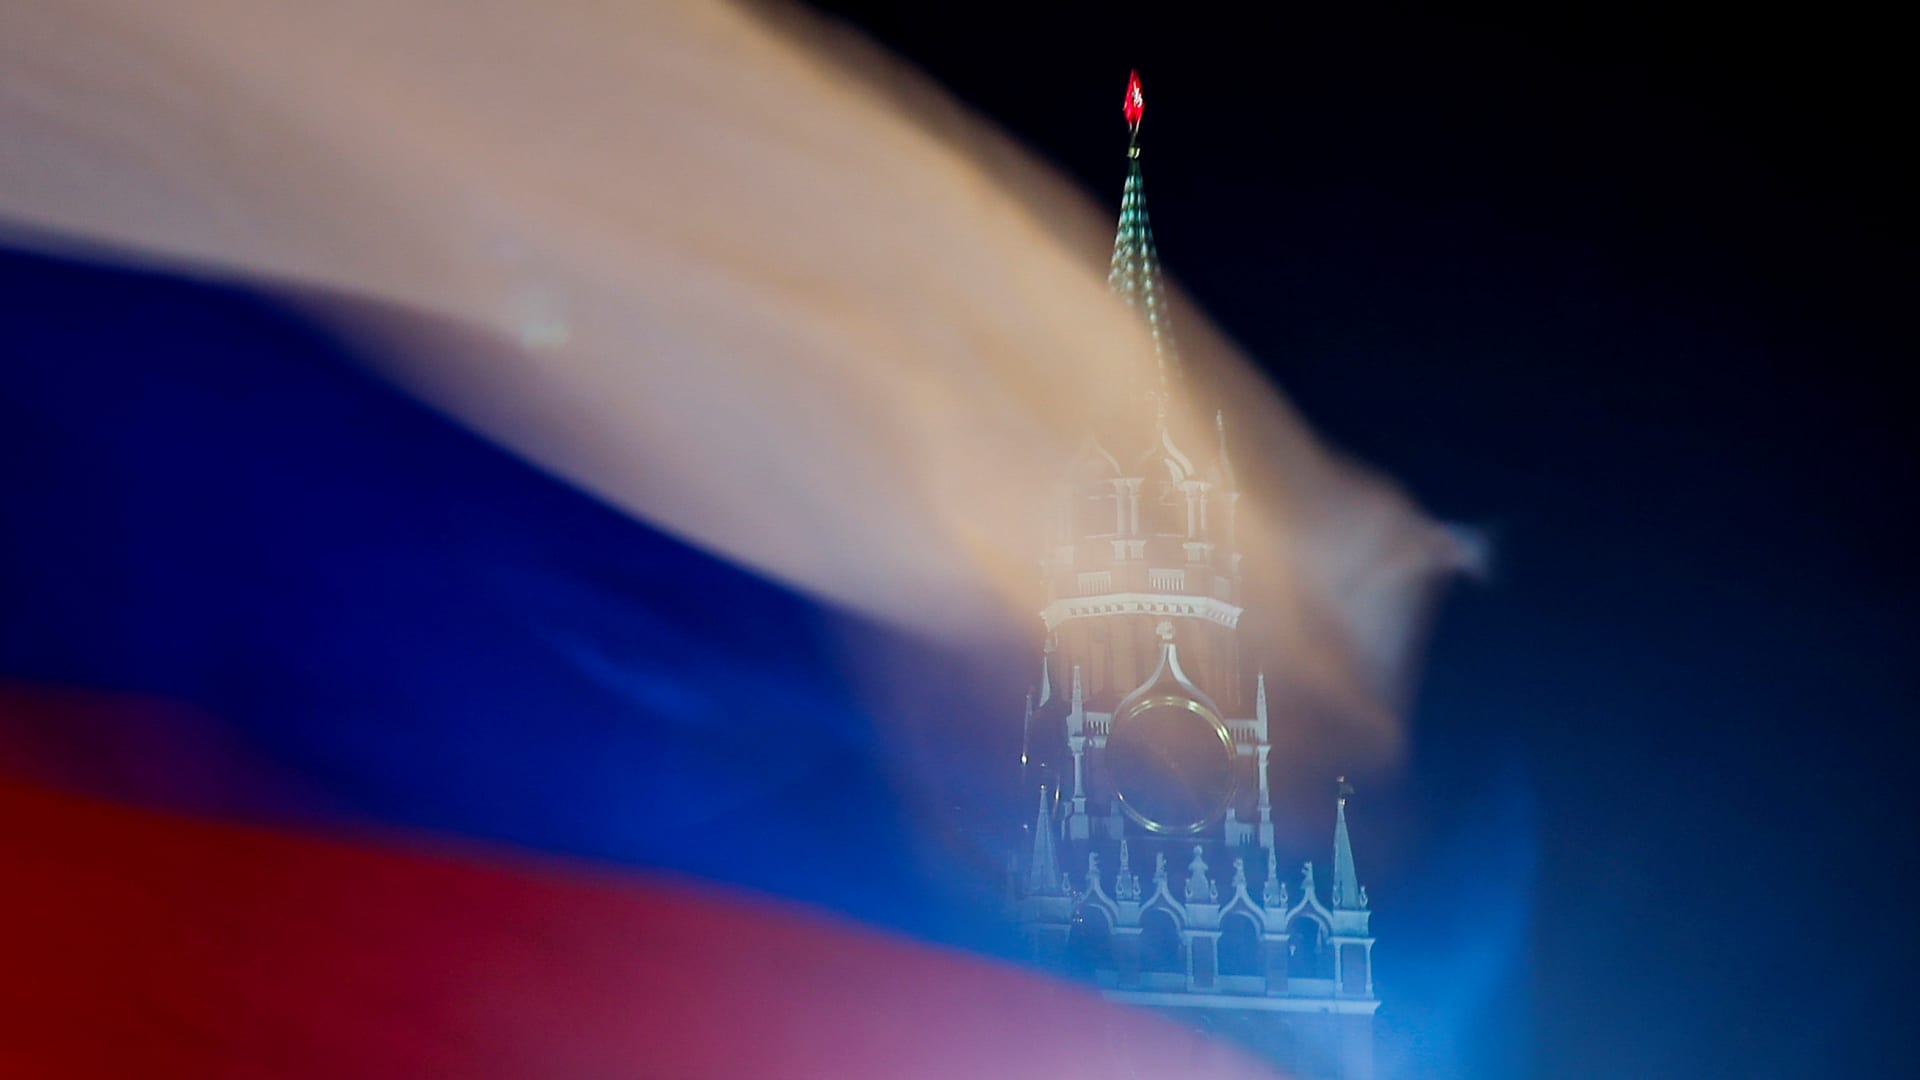 Russian flag flies with the Spasskaya Tower of the Kremlin in the background in Moscow, Russia, February 27, 2019.